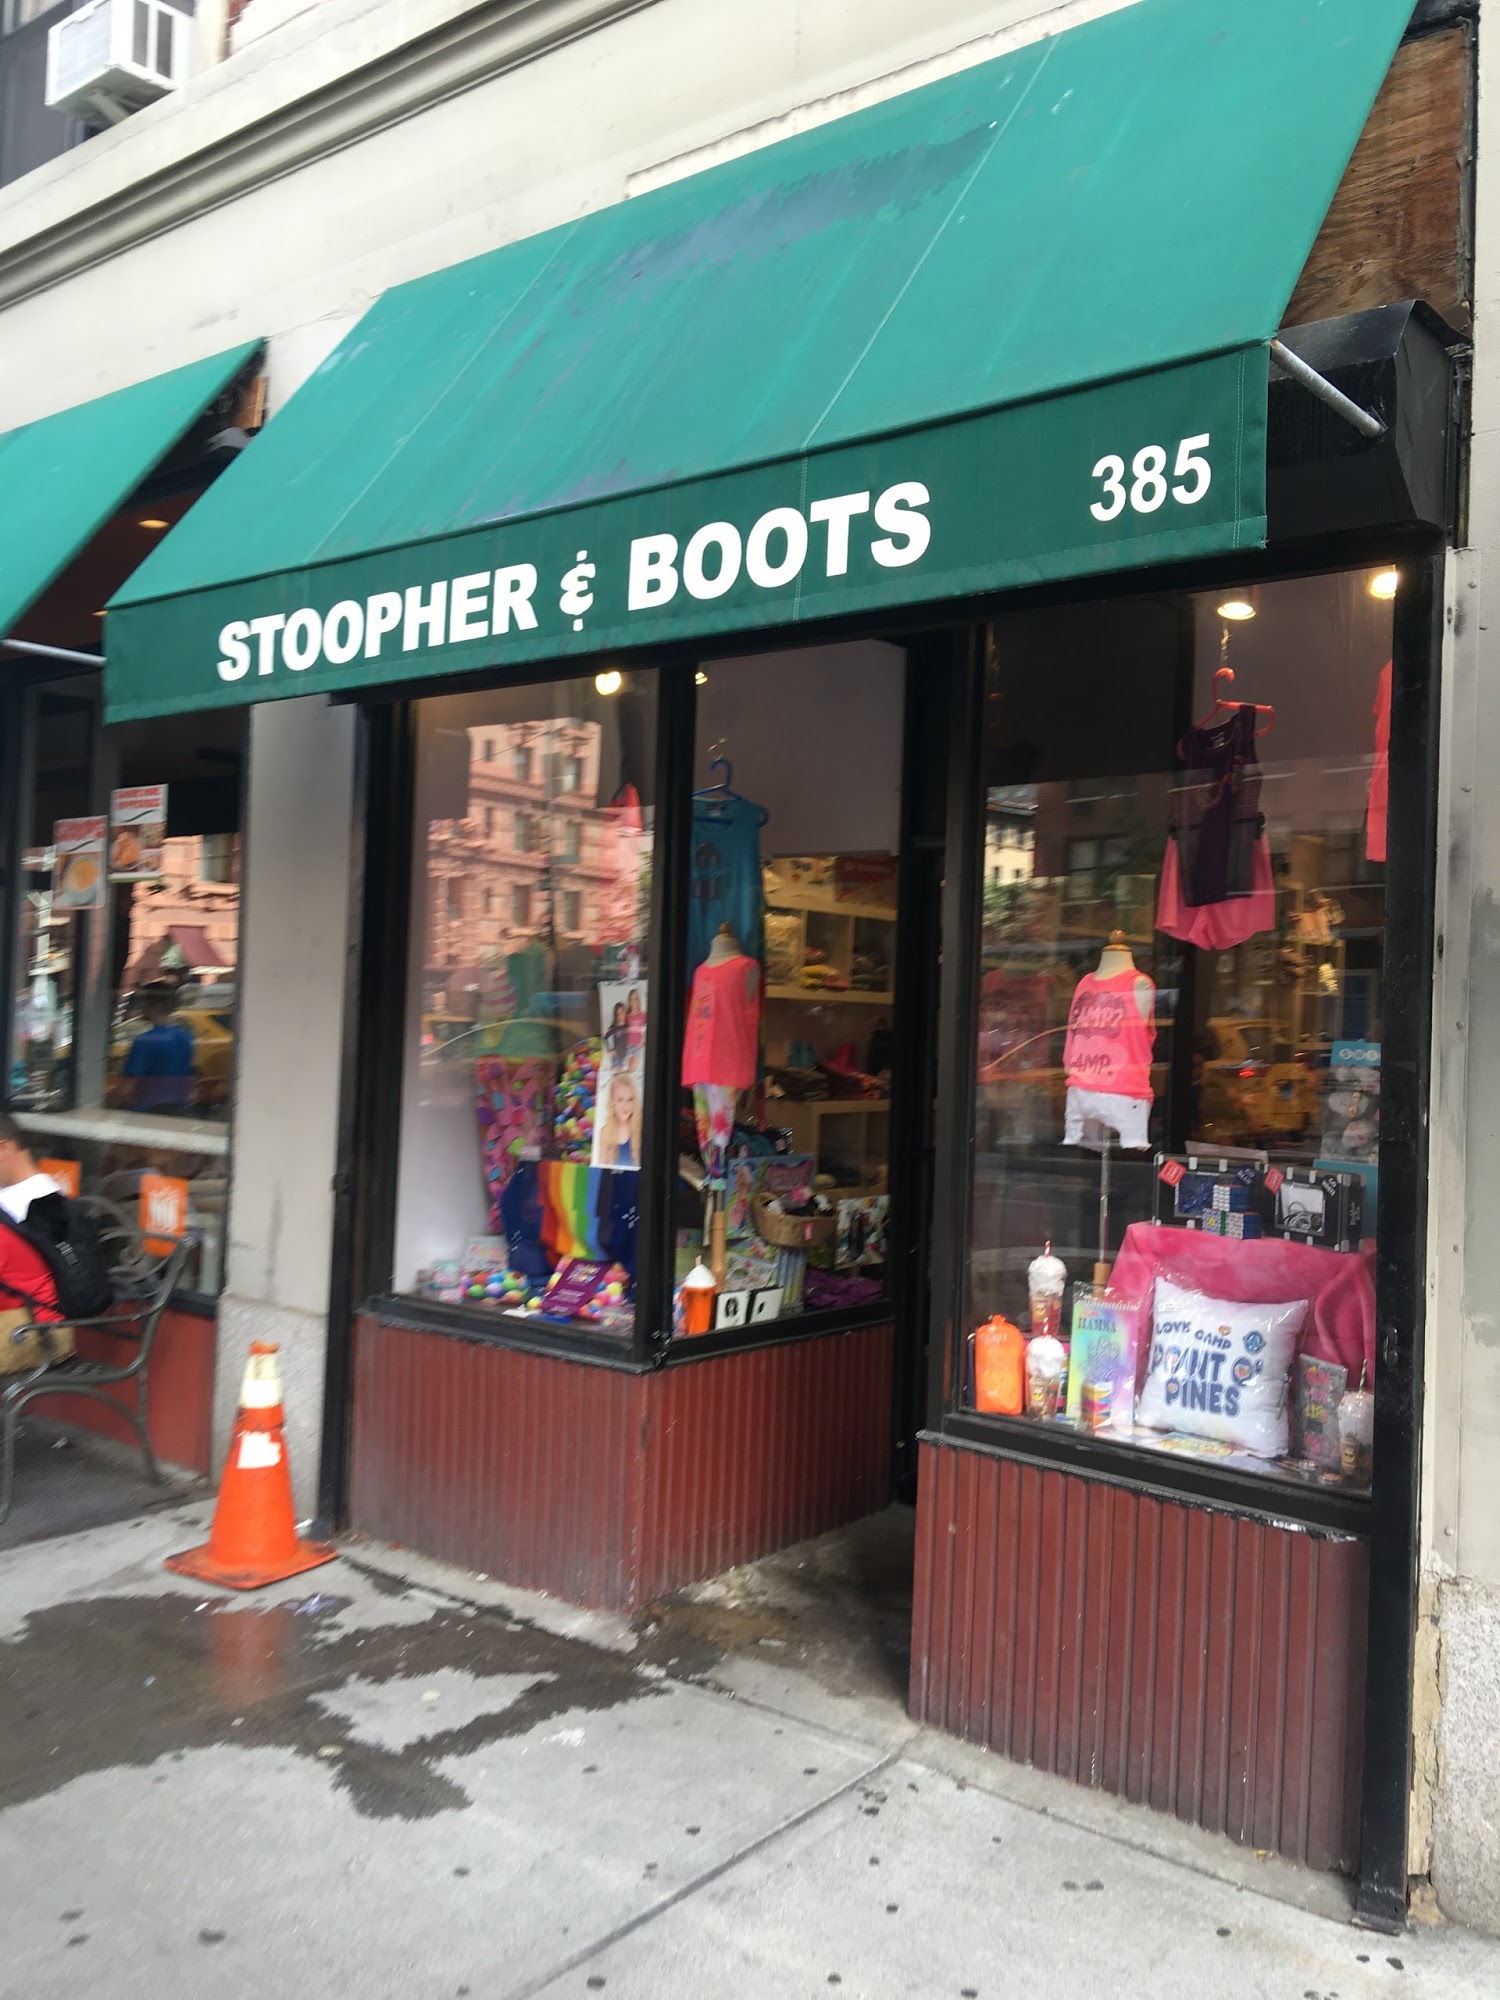 Stoopher & Boots